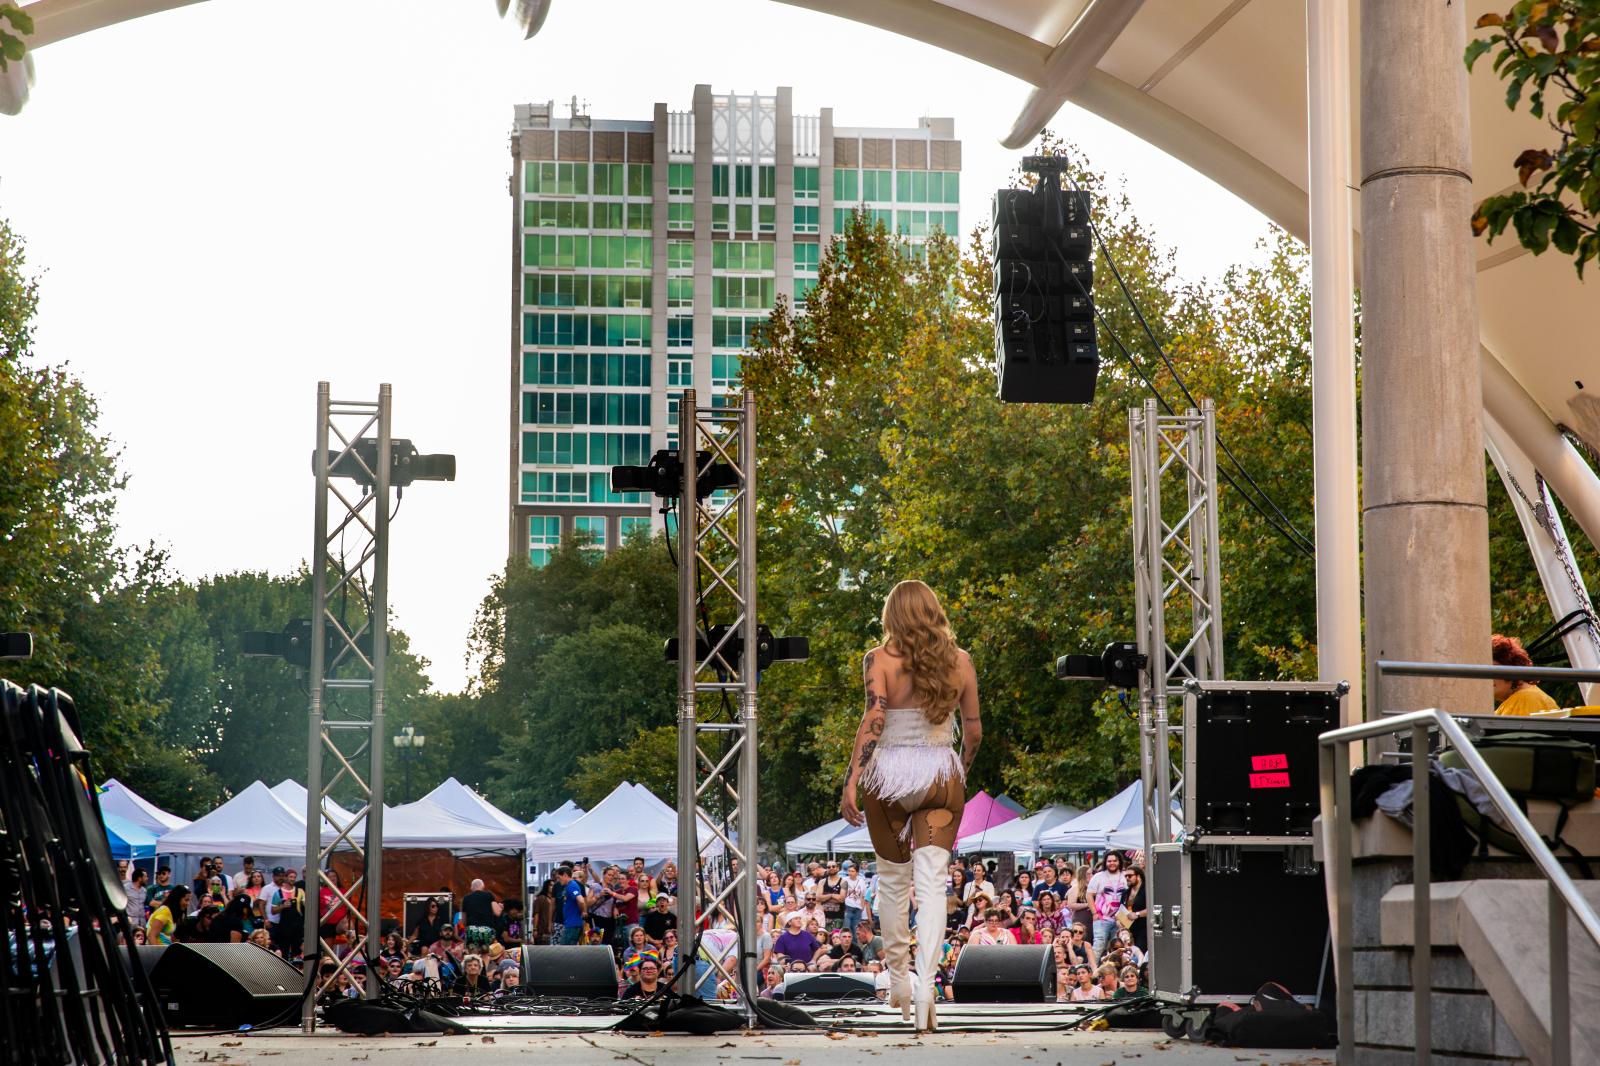 Taking the Stage at the Blue Ridge Pride Festival Drag Performance | Buy this image